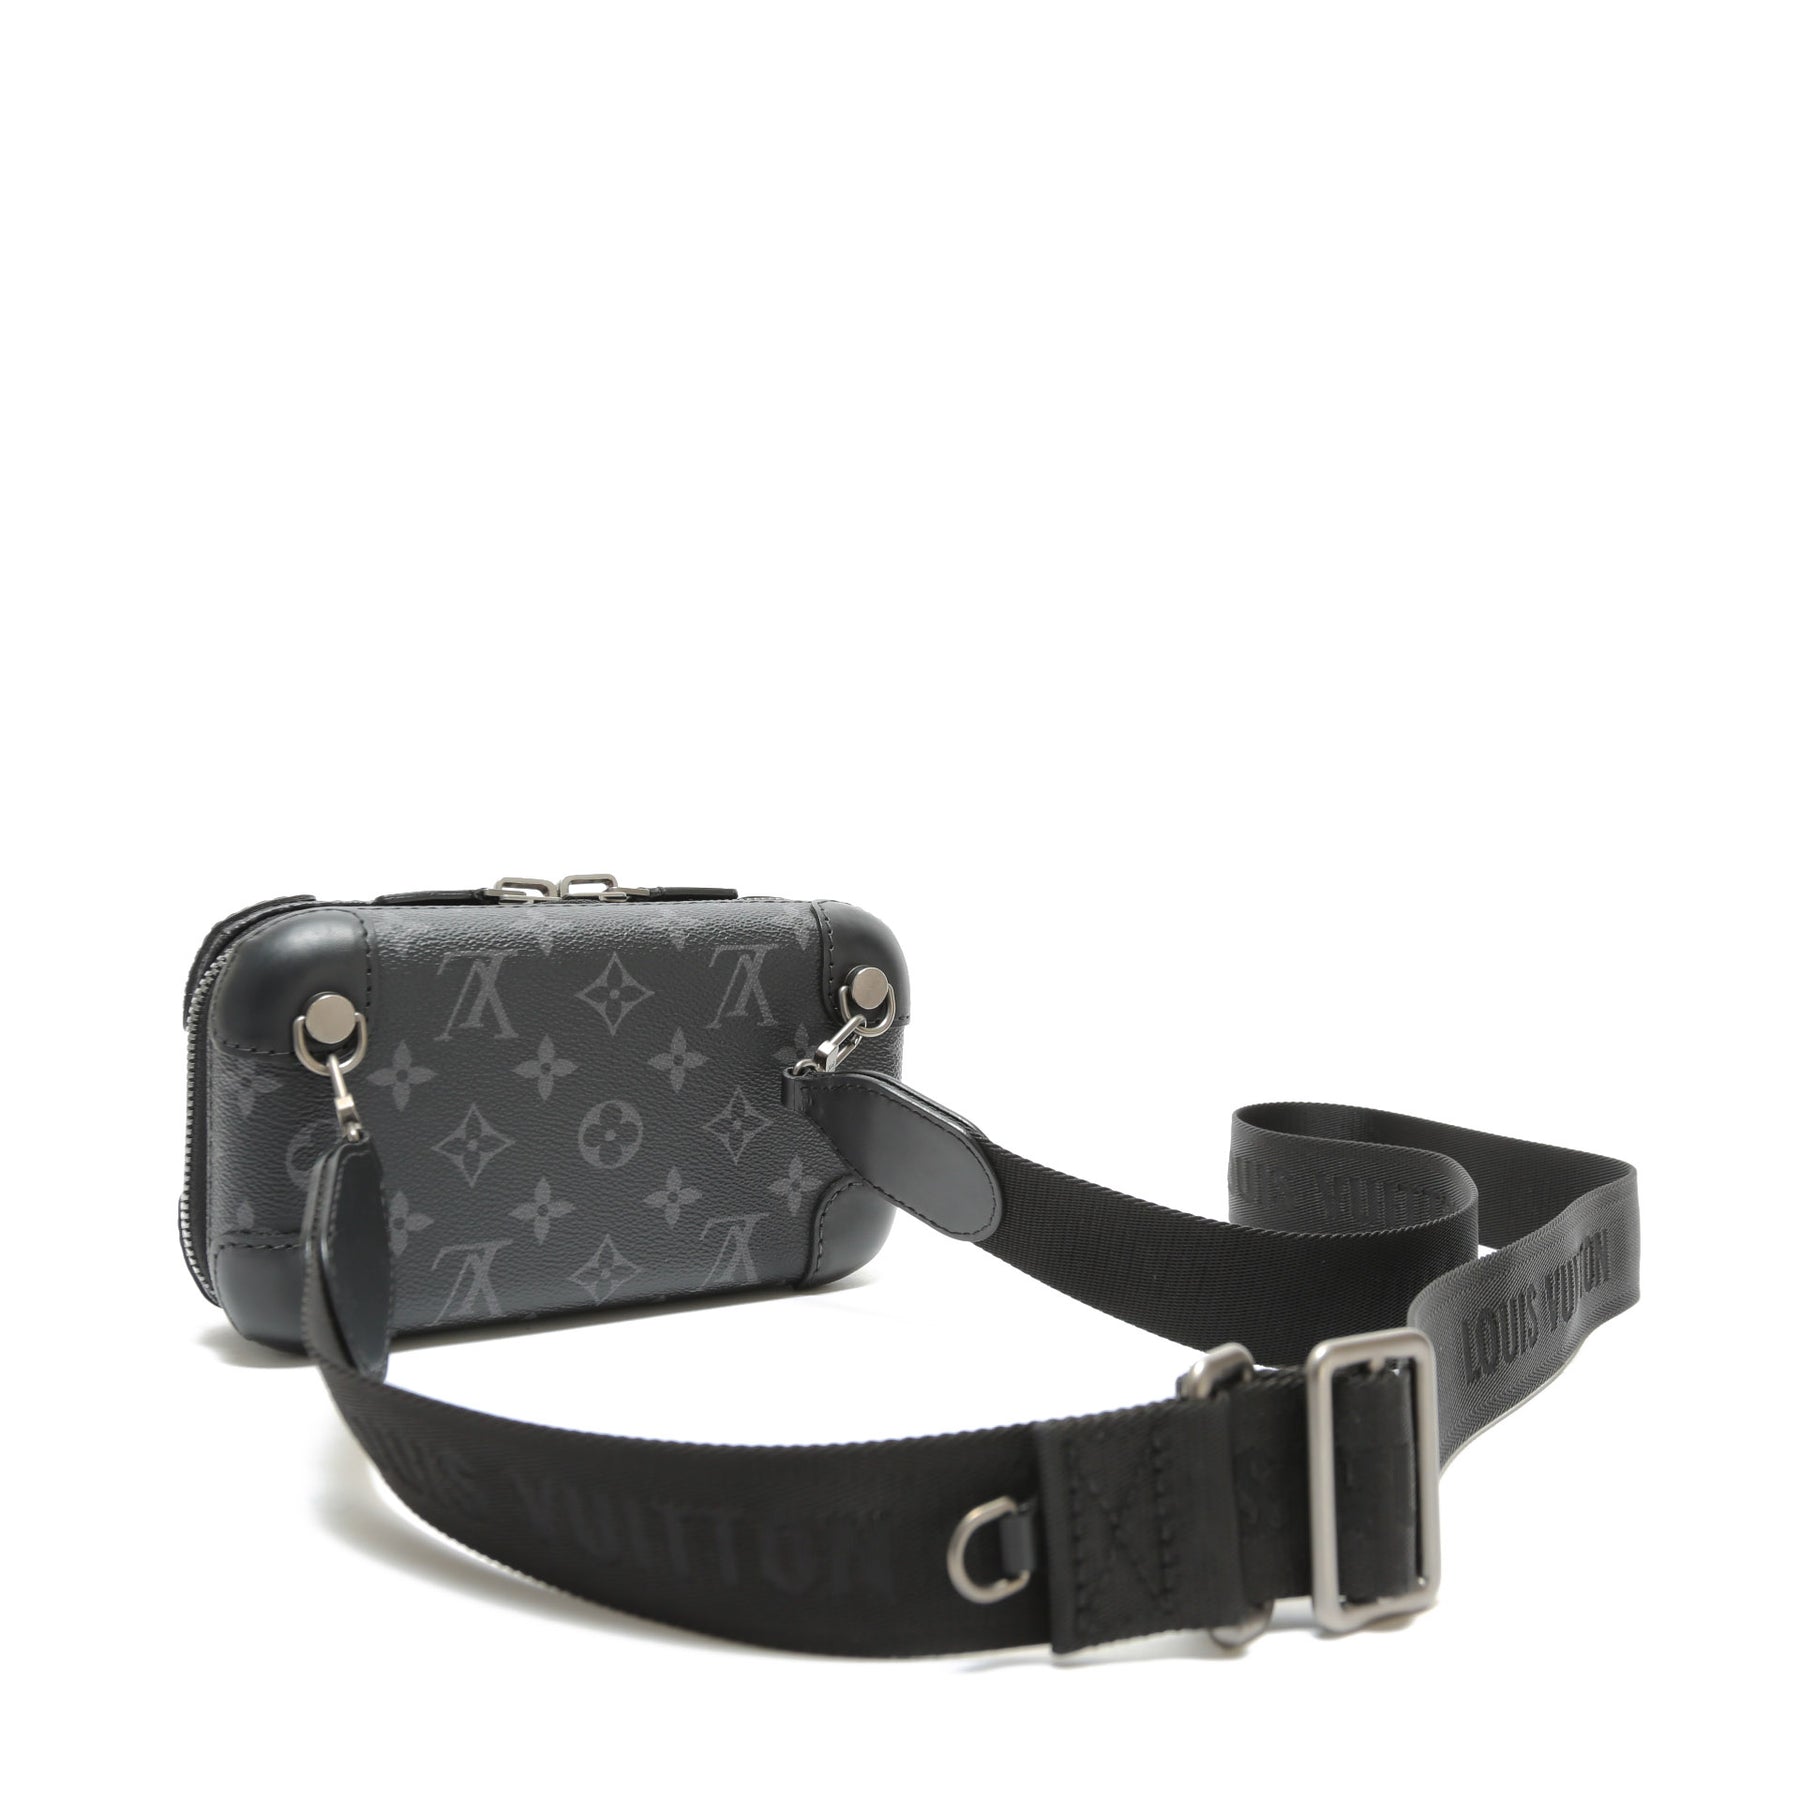 Amp Up Your Accessories Collection with Louis Vuitton's Horizon